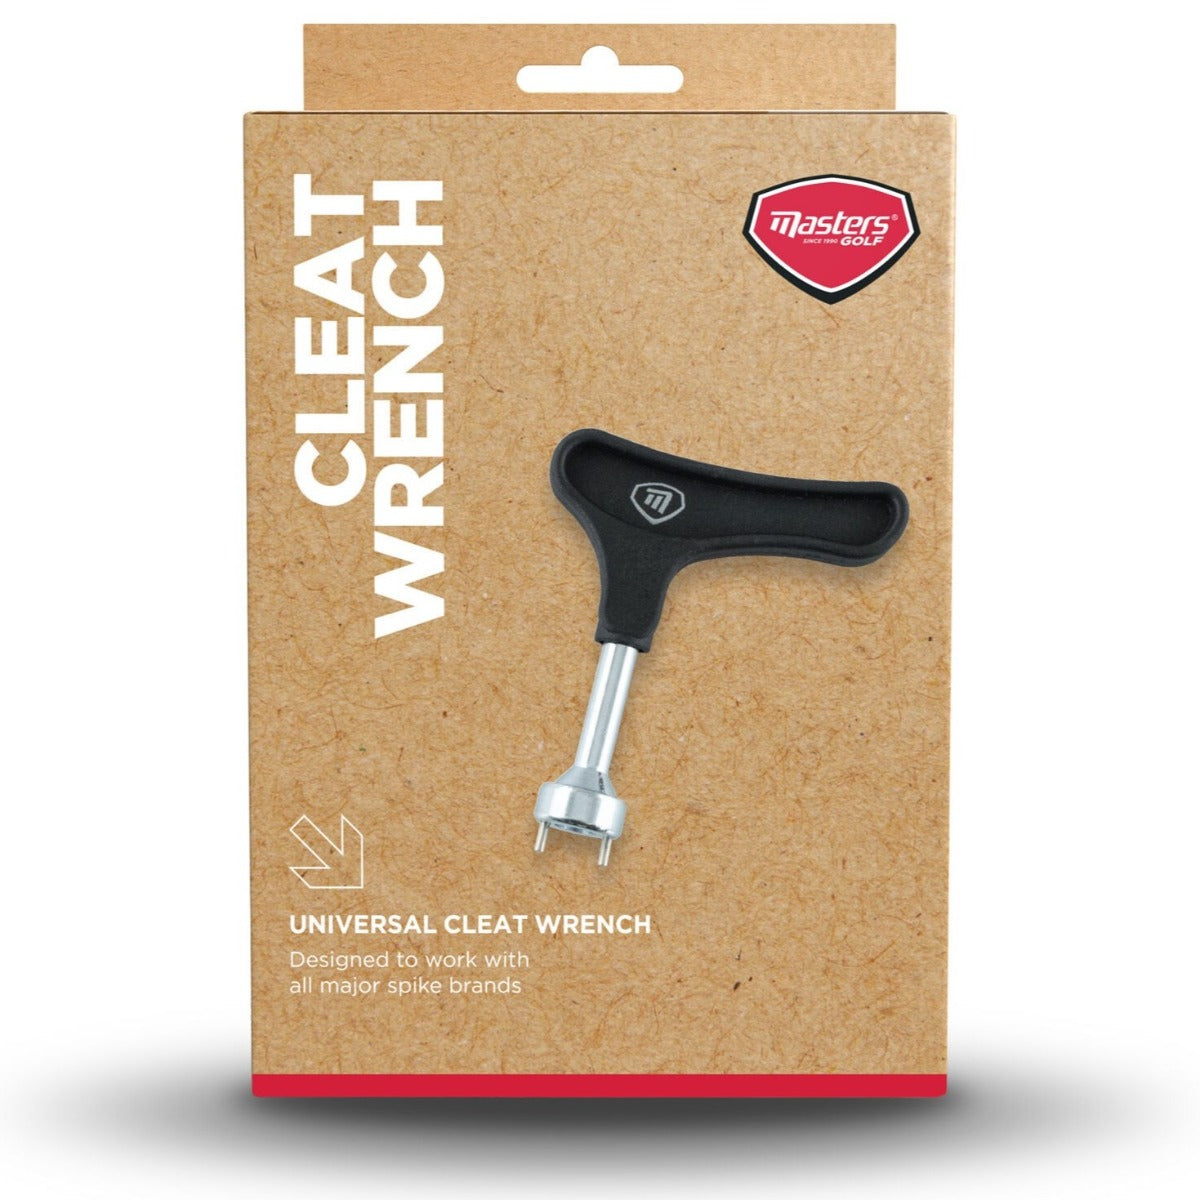 Masters Deluxe Spike Wrench